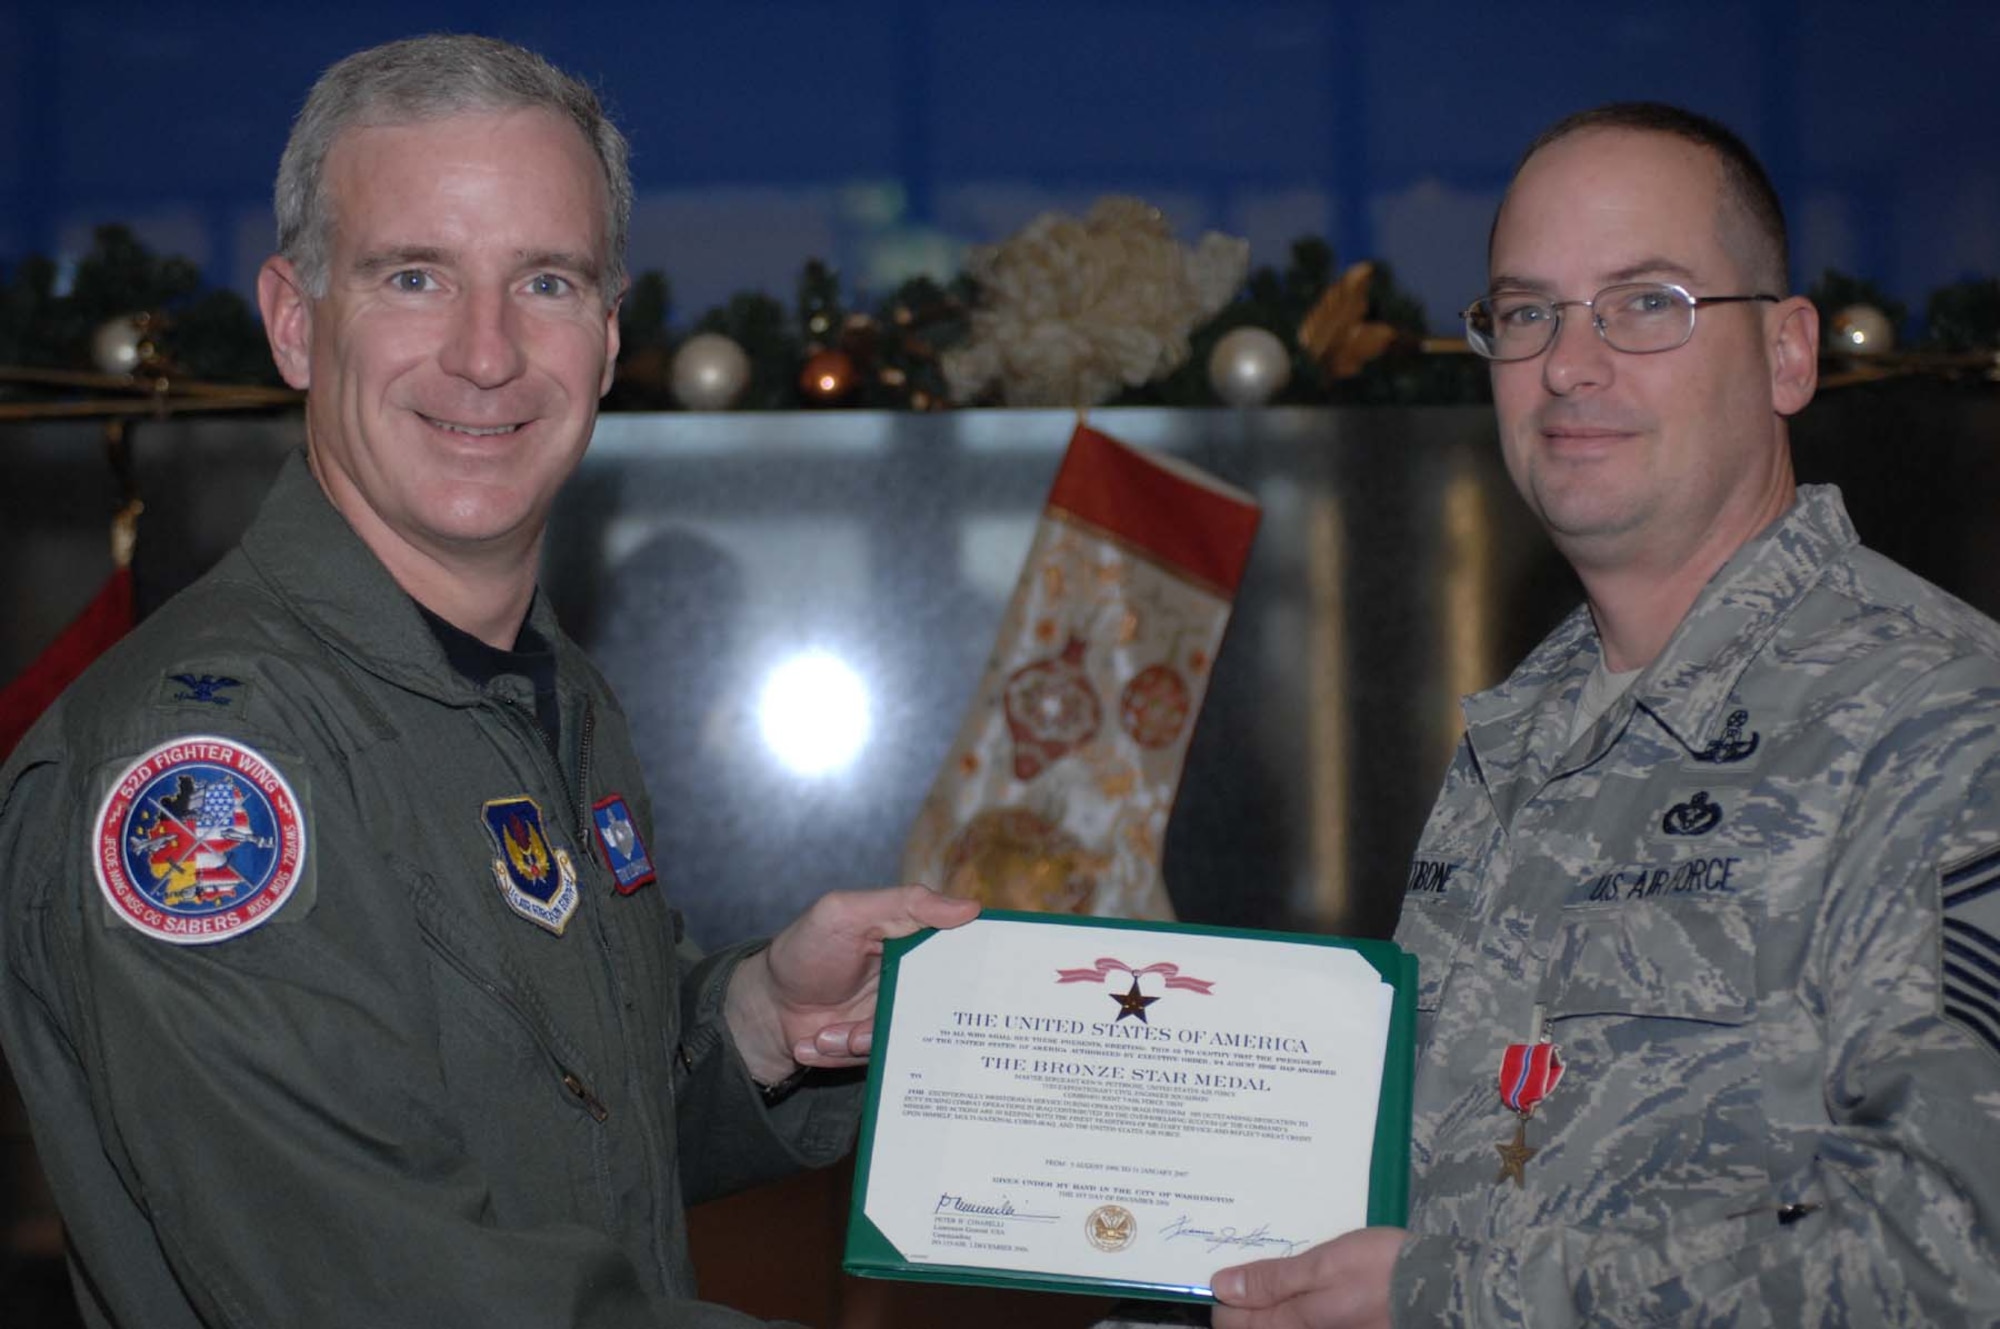 SPANGDAHLEM AIR BASE, Germany -- Senior Master Sgt. Ken Pettibone, 52nd Civil Engineer Squadron, is presented with his Bronze Star certificate by Col. Thomas Feldhausen, 52nd Fighter Wing vice commander. This is Sergeant Pettibone’s second Bronze Star. (U.S. Air Force photo/Airman 1st Class Jenifer Calhoun)